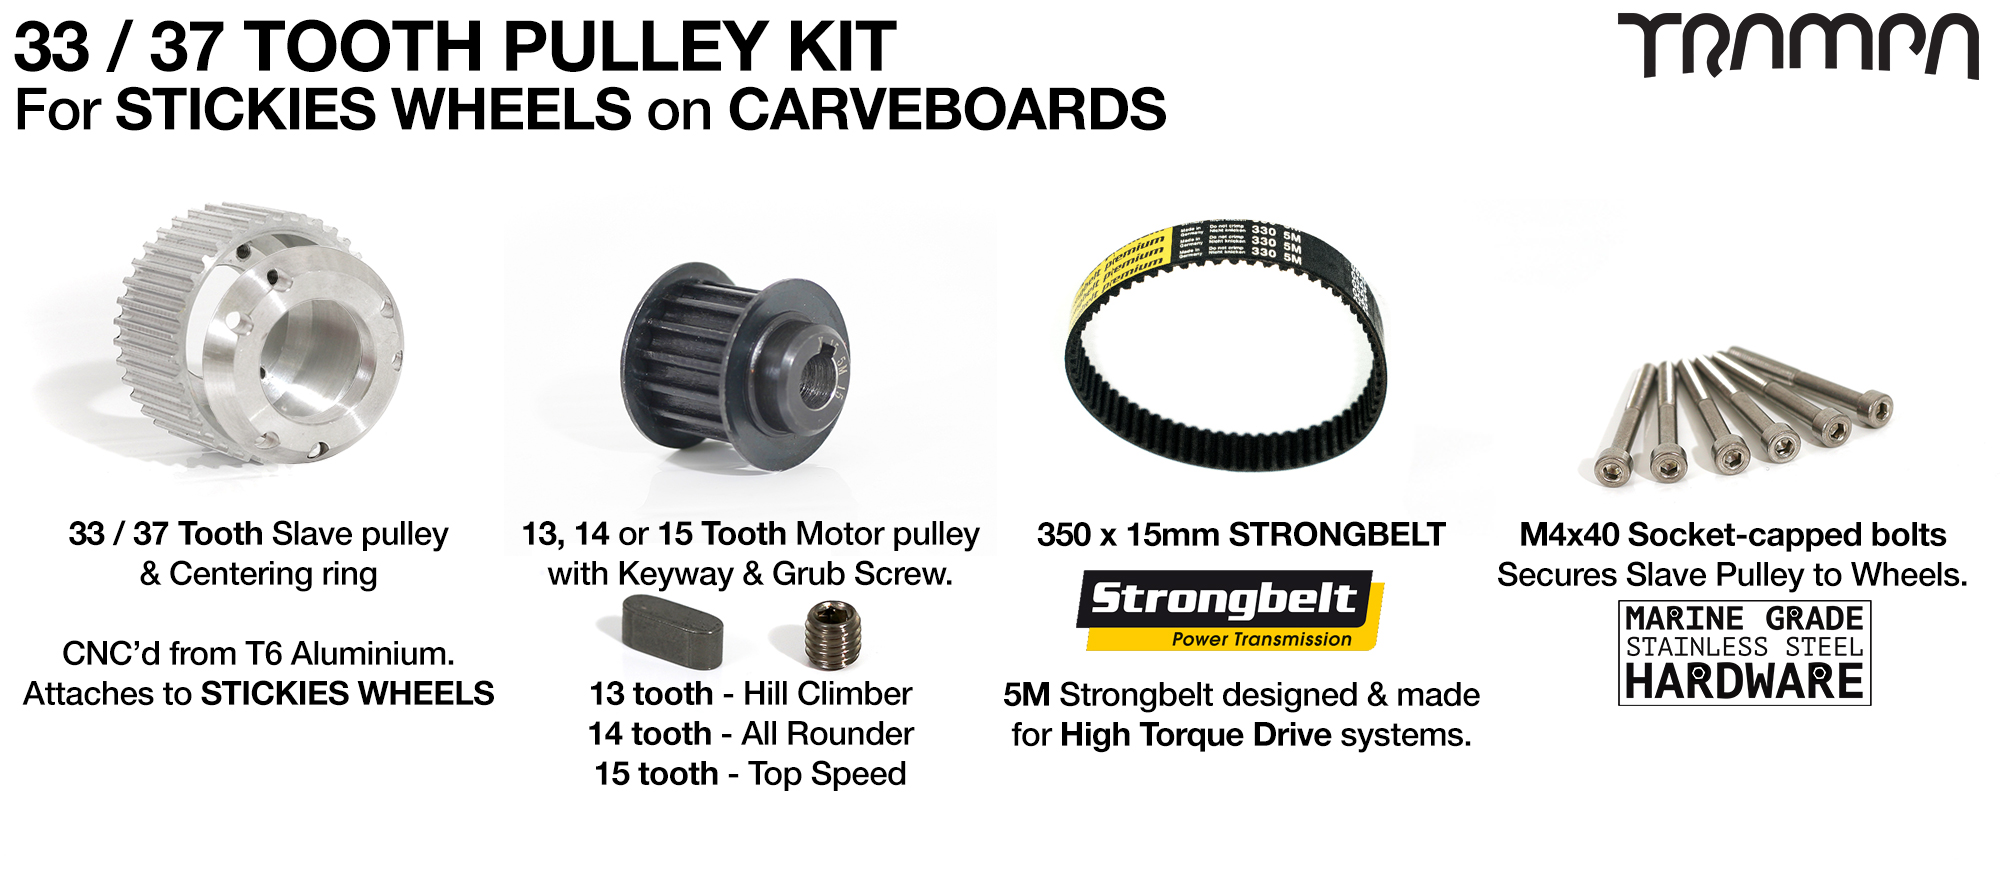 STREET CARVER 33 or 37 Tooth Pulley Kit with 330mm x 15mm Belt for STICKIES Wheels 